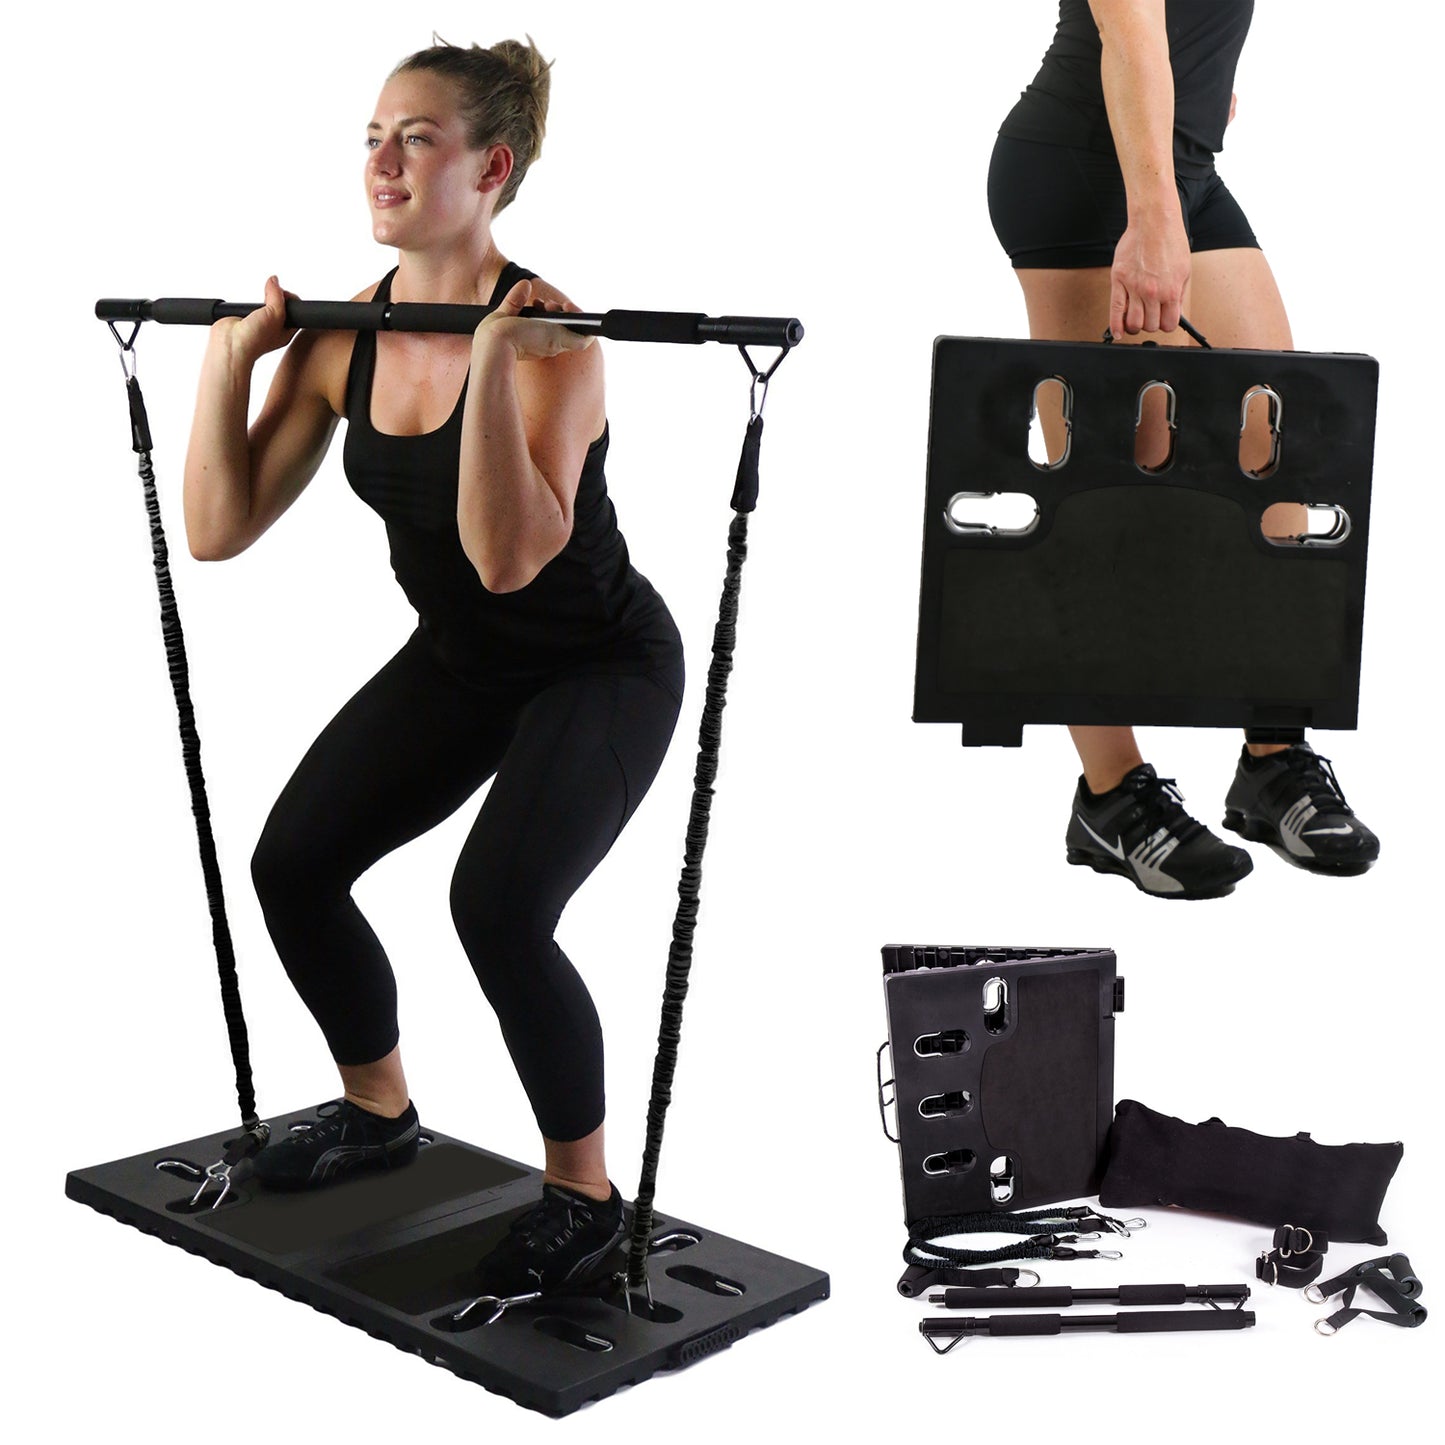 Full Portable Home Gym Workout with Resistance Bands